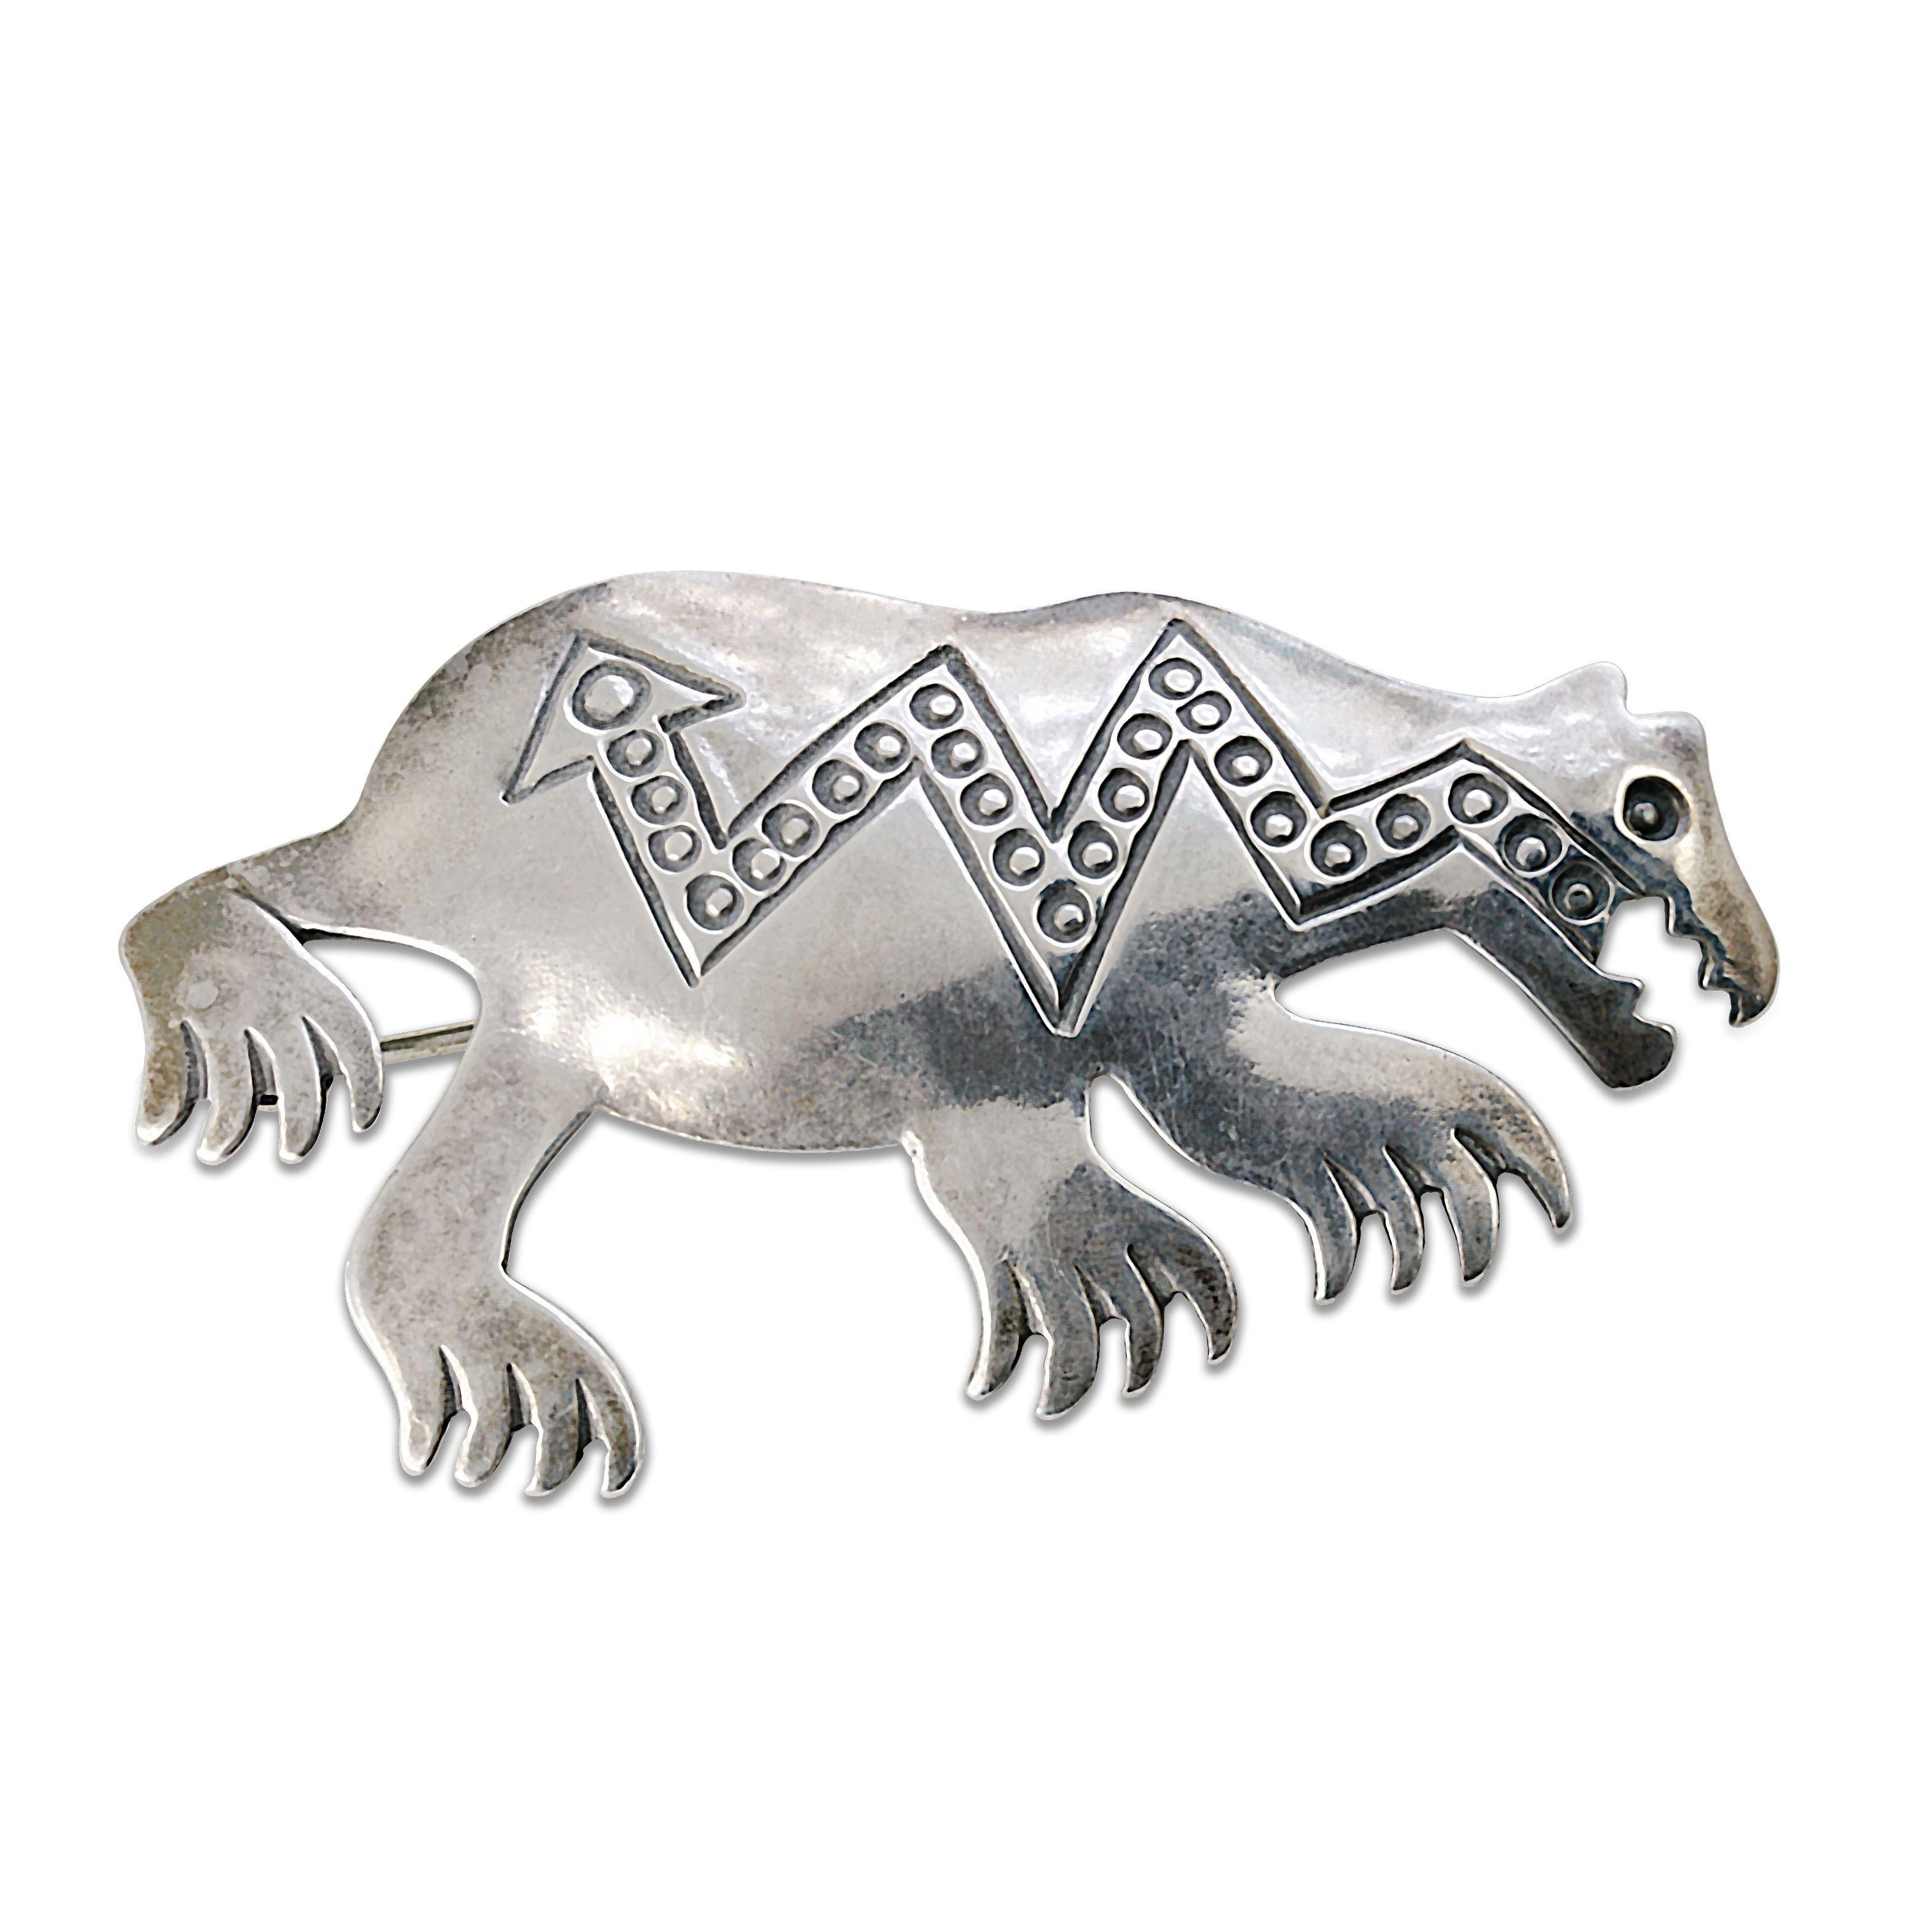 Highly desirable Vintage Hand crafted Sterling Silver Mystical Creature Brooch Pin Signed ELWOOD REYNOLDS STERLING. Well known Silversmith is son of Cheyenne Chief Alva Jacob Reynolds. Illuminate your look with Timeless Beauty with this Family